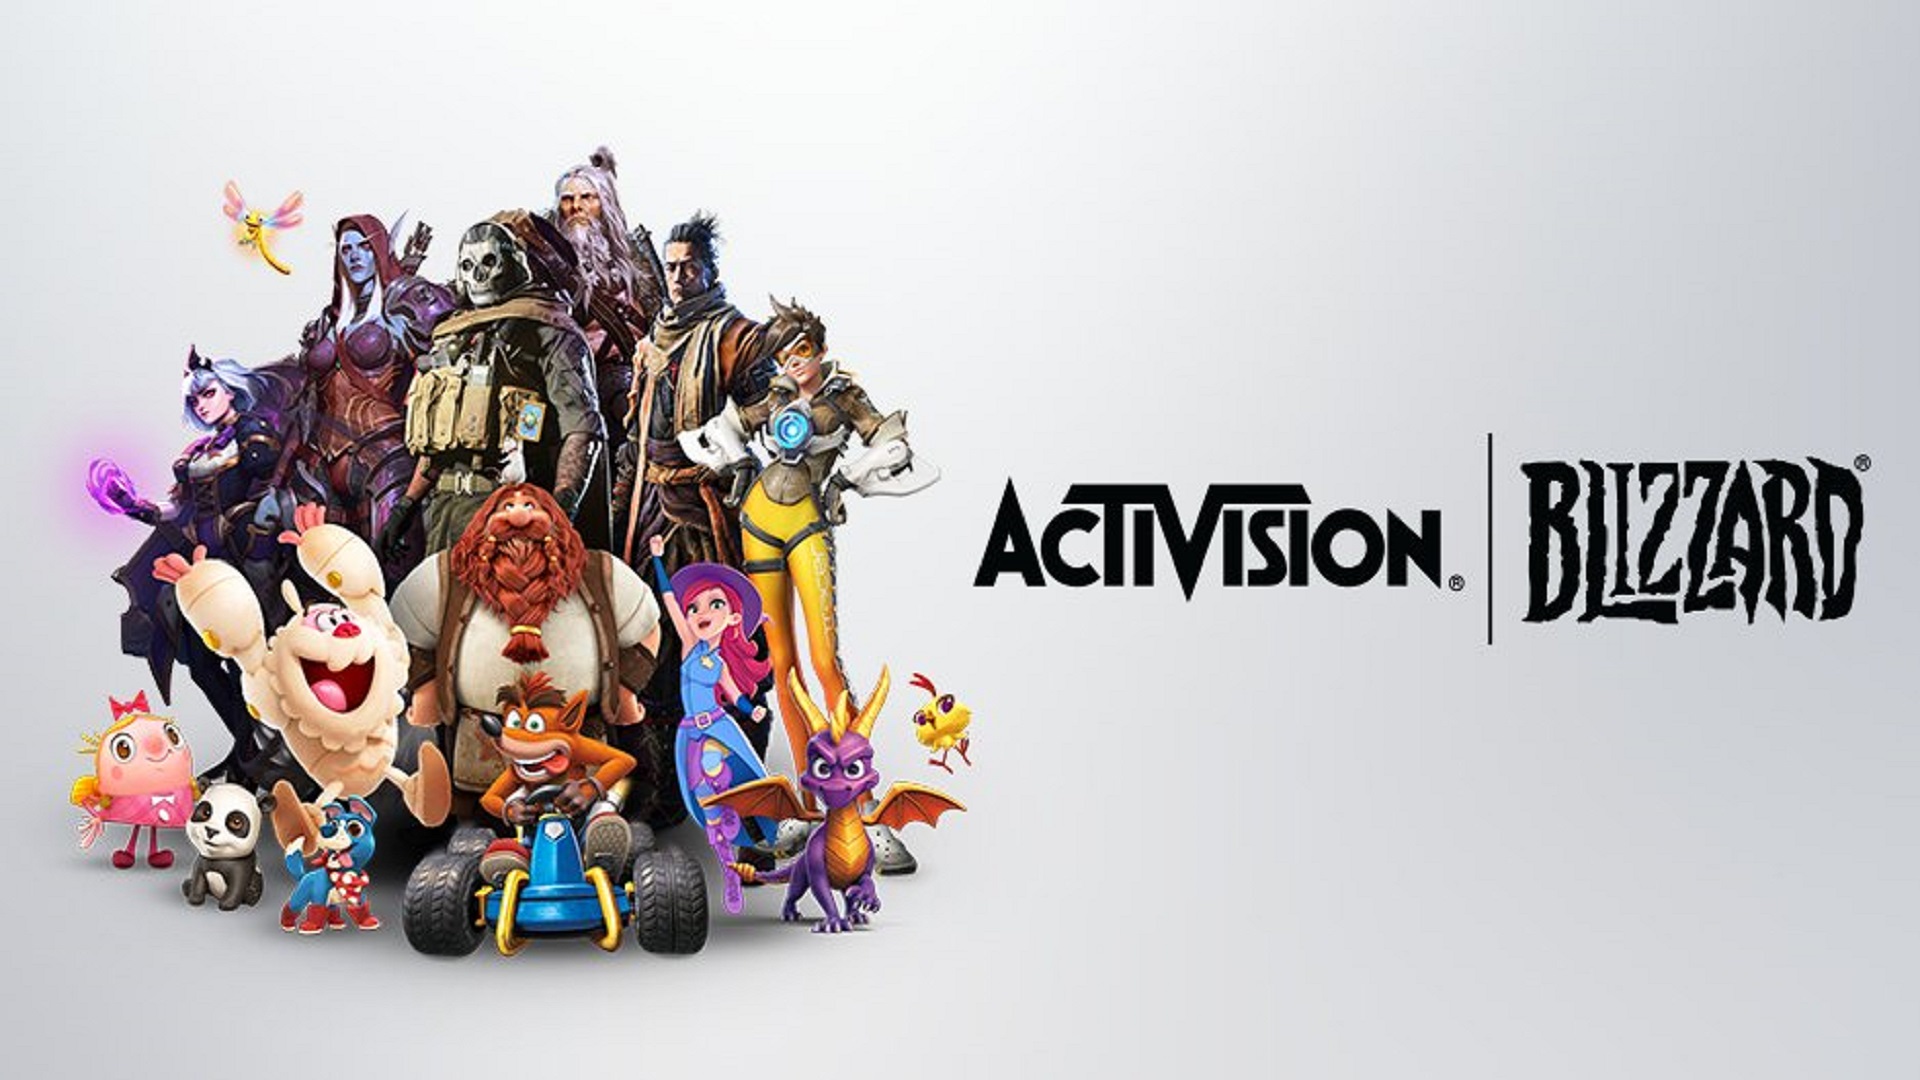 Microsoft’s Activision deal has now reportedly been approved by China